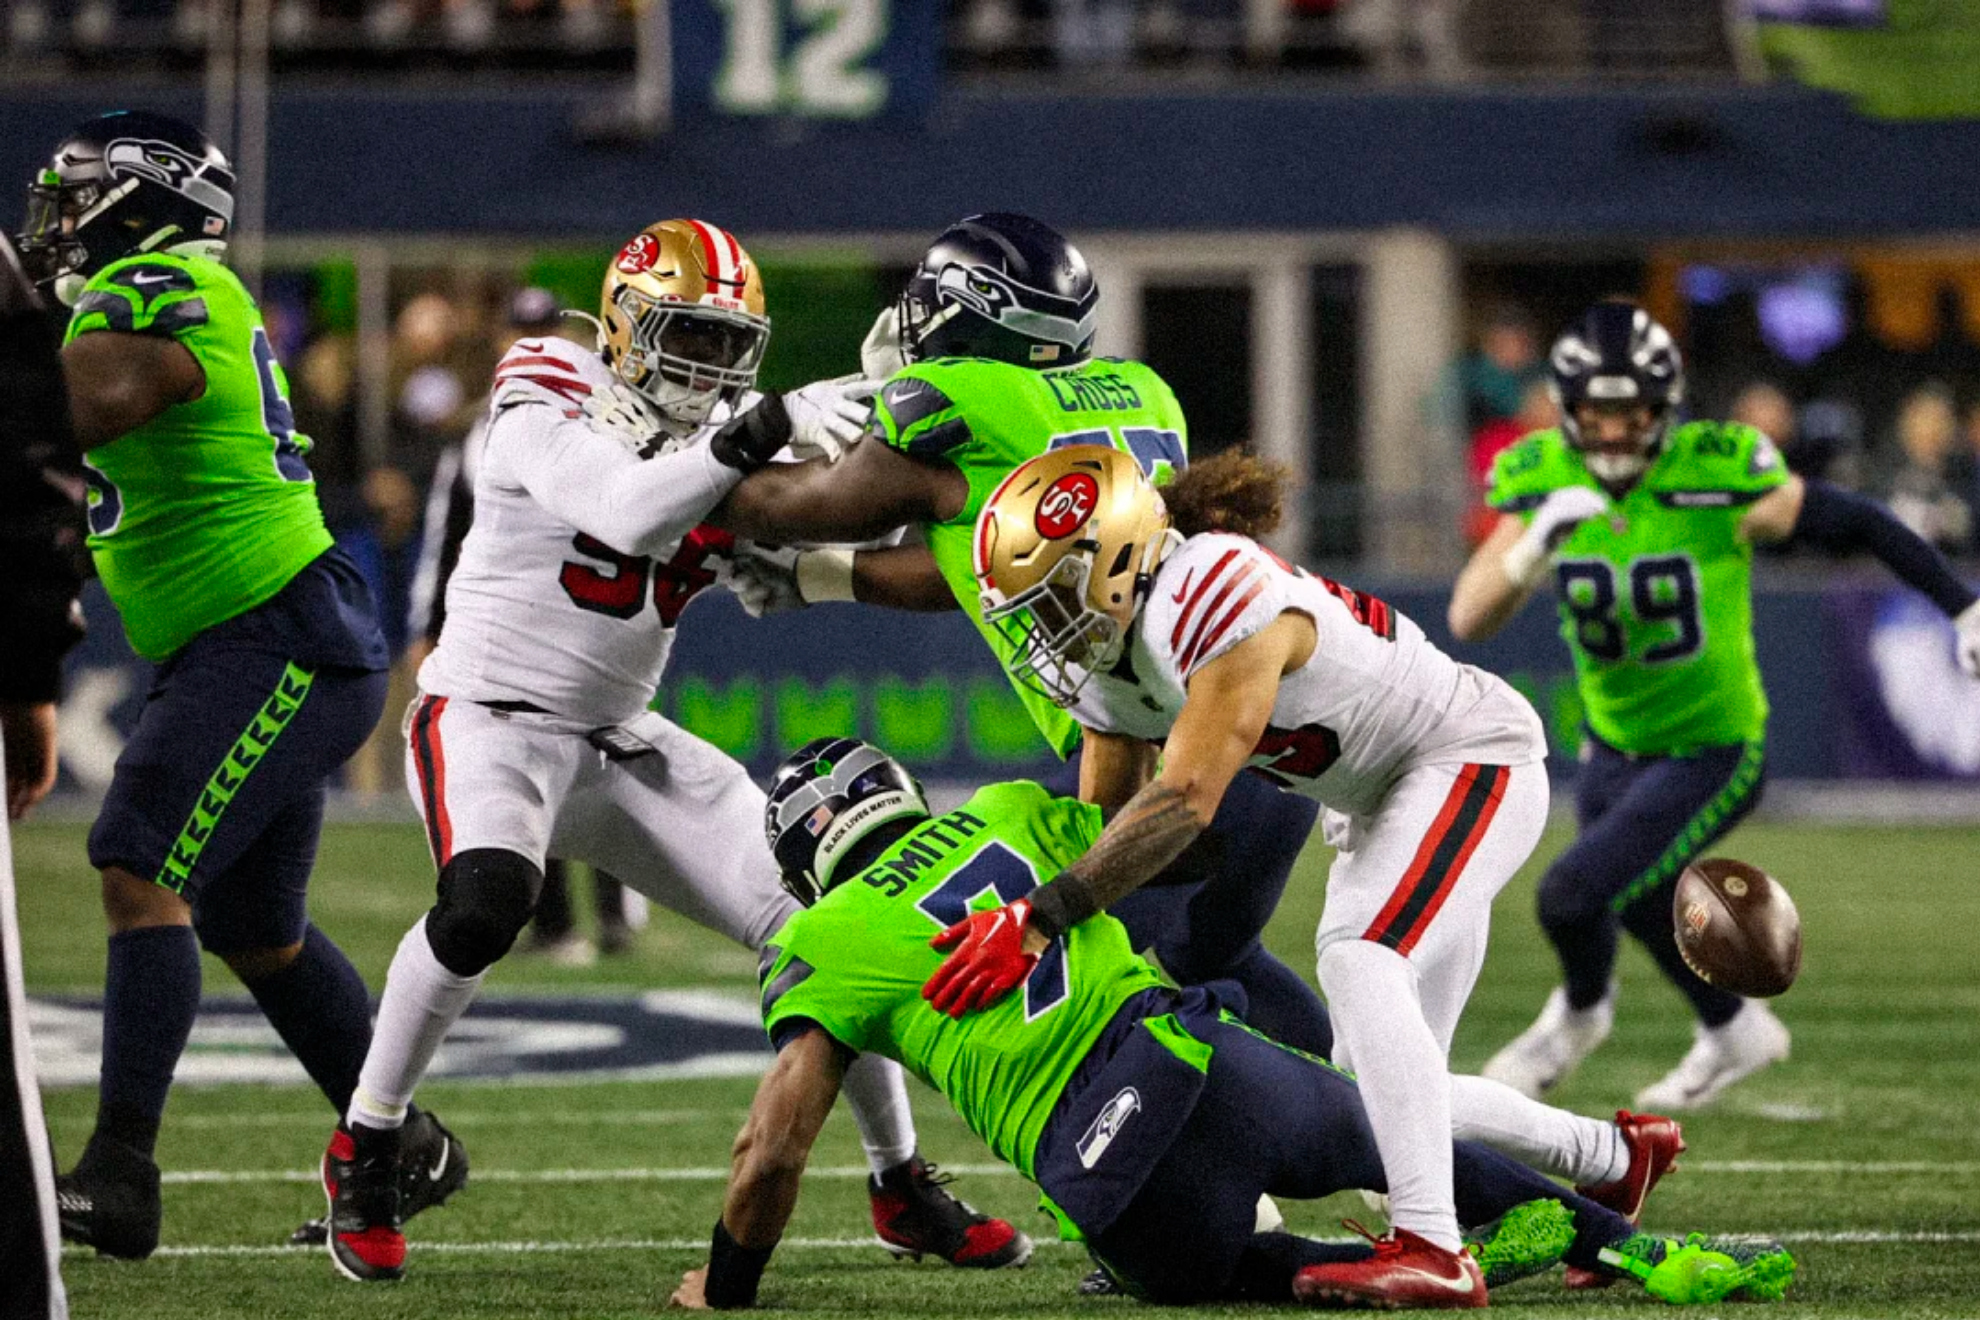 Seattle Seahawks - San Francisco 49ers: Start time, where to watch